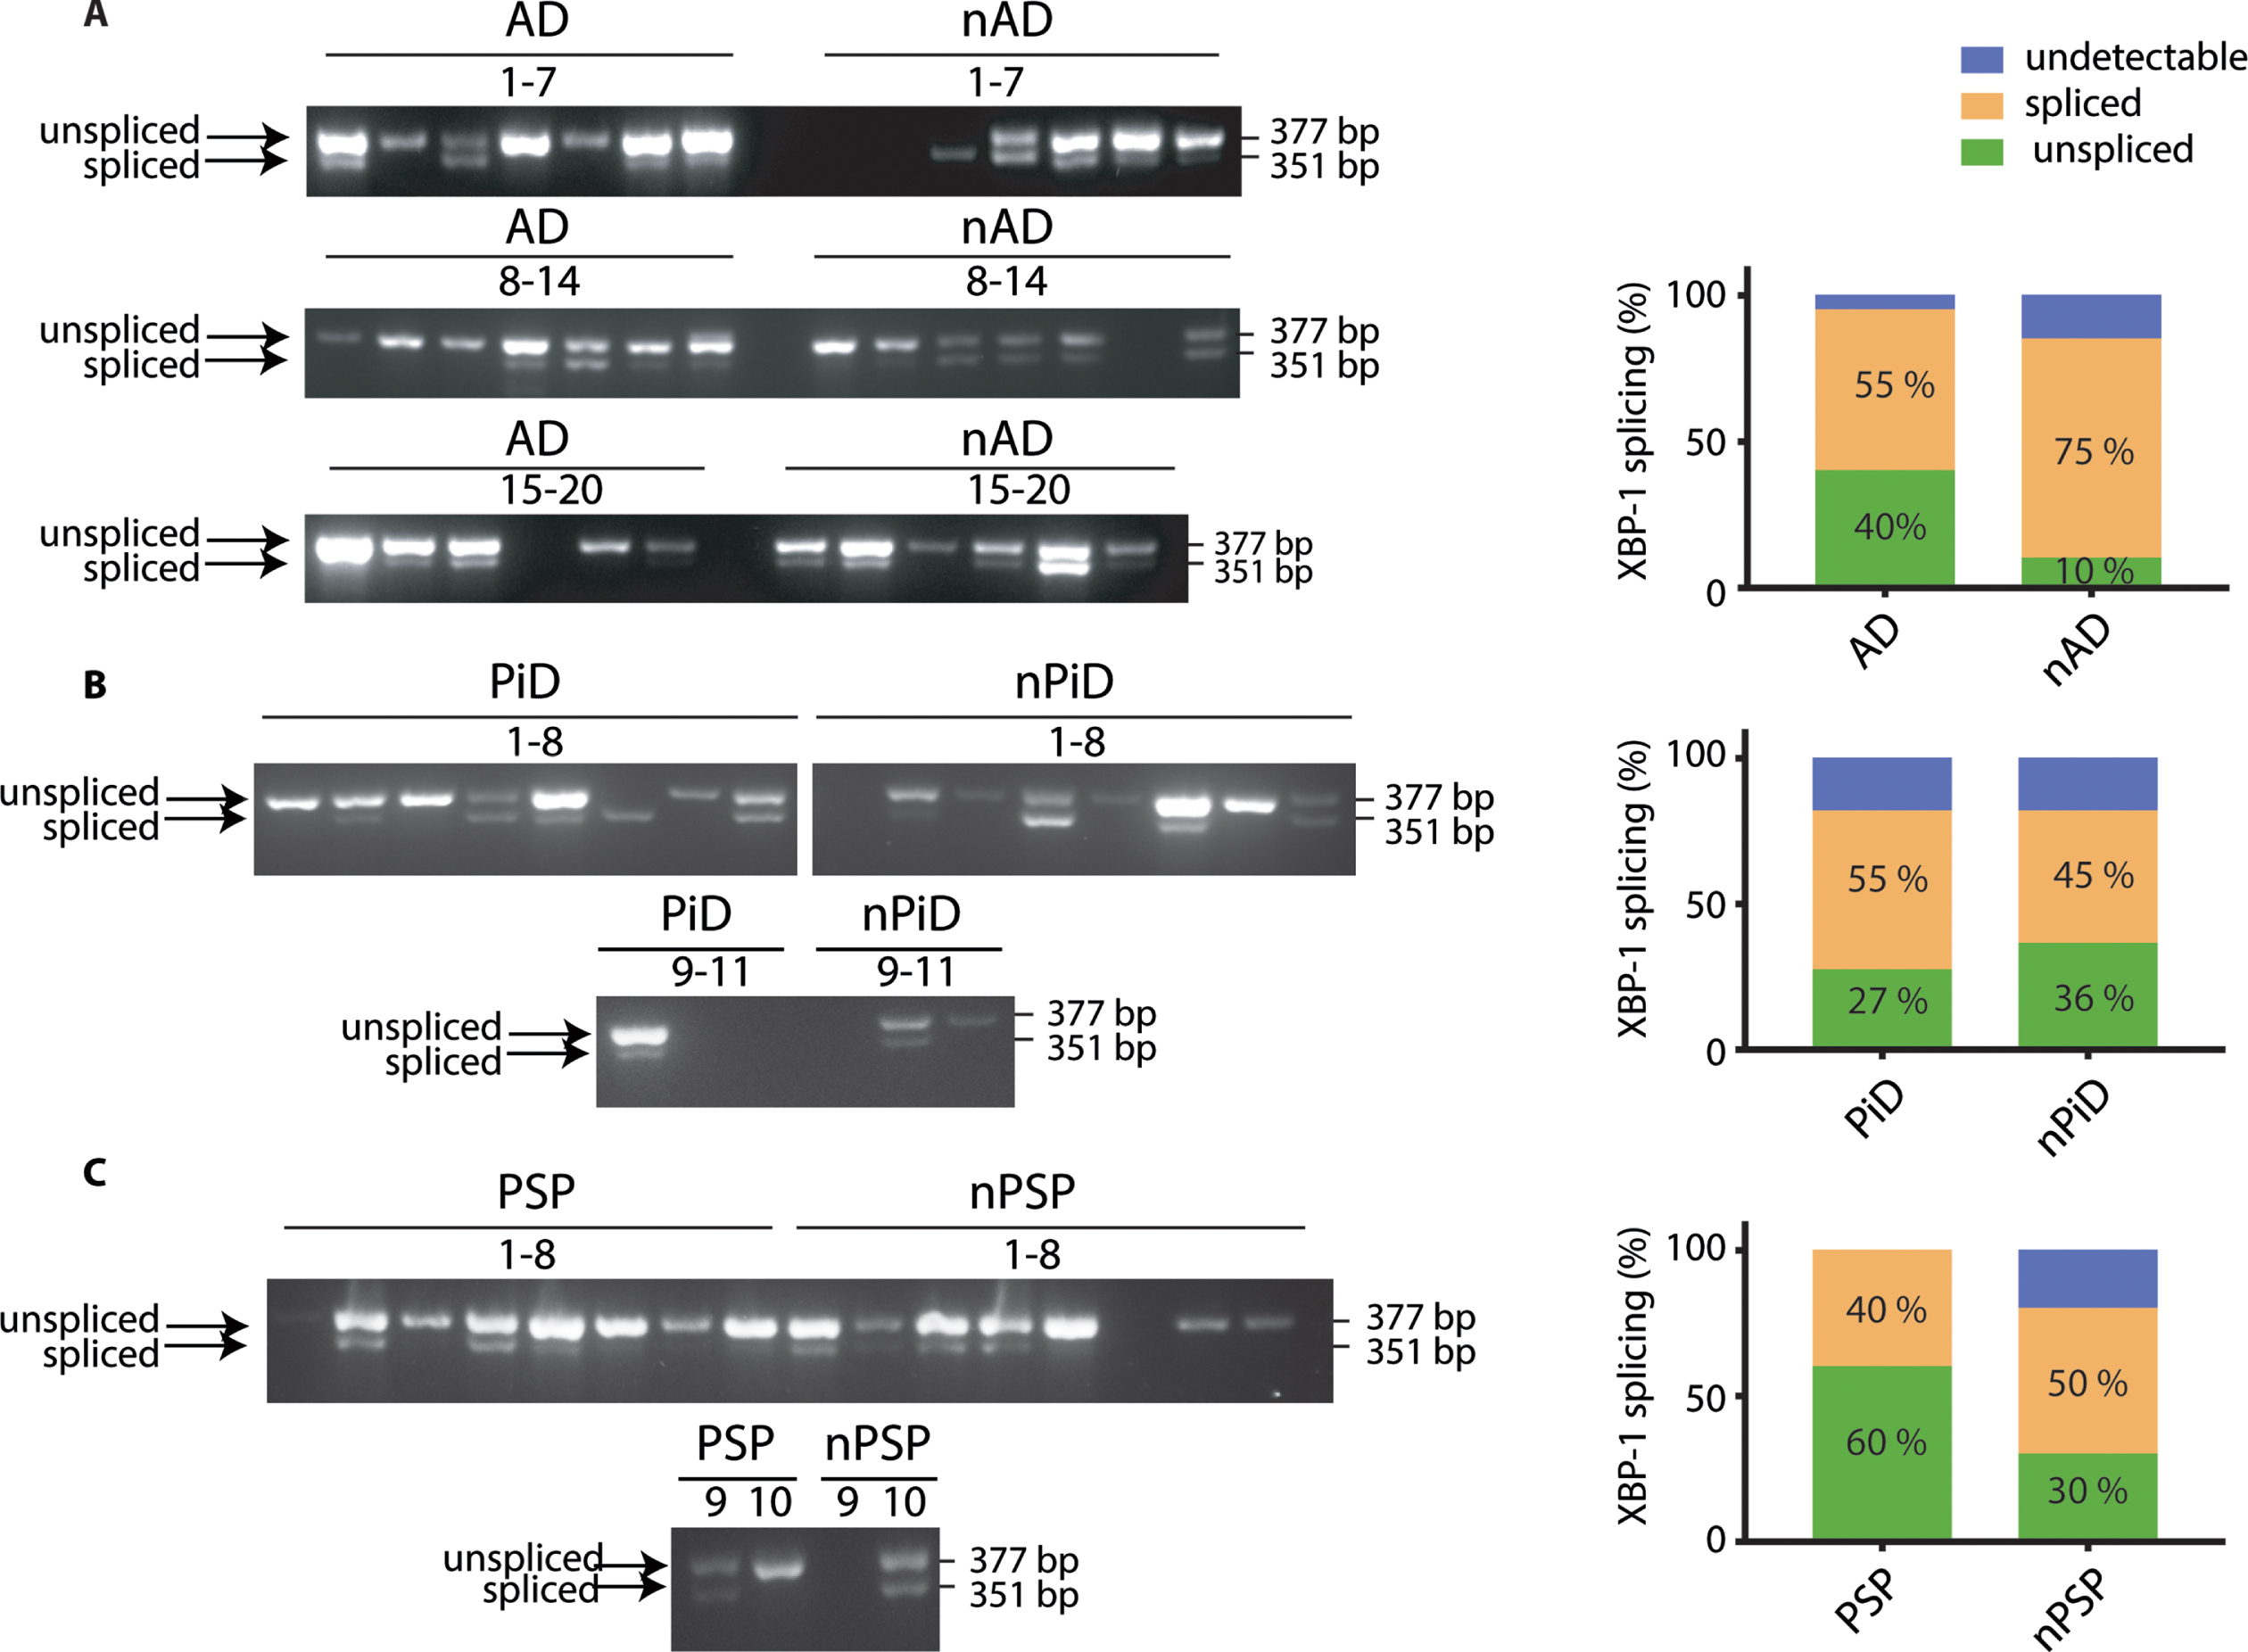 XBP-1 splicing in tauopathies and age-matched control brains. cDNA from brain samples from (A) AD, (B) PiD, and (C) PSP together with respective non-demented controls were subjected to PCR with primers designed to amplify the unspliced and spliced variants of XBP-1. The products were resolved on a 2.5%agarose gel. The PCR products were classified as undetectable, spliced, or unspliced, and the distinct PCR outcomes are expressed as percentage of total samples and analyzed using Fisher’s exact test for (A) AD (p = 0.1560), (B) PiD (p = 0.9999), and (C) PSP samples (p = 0.6372). Number of cases: ND = 20, AD = 20, nPiD = 11, PiD = 11, nPSP = 10, PSP = 10. Each lane corresponds to one individual case.